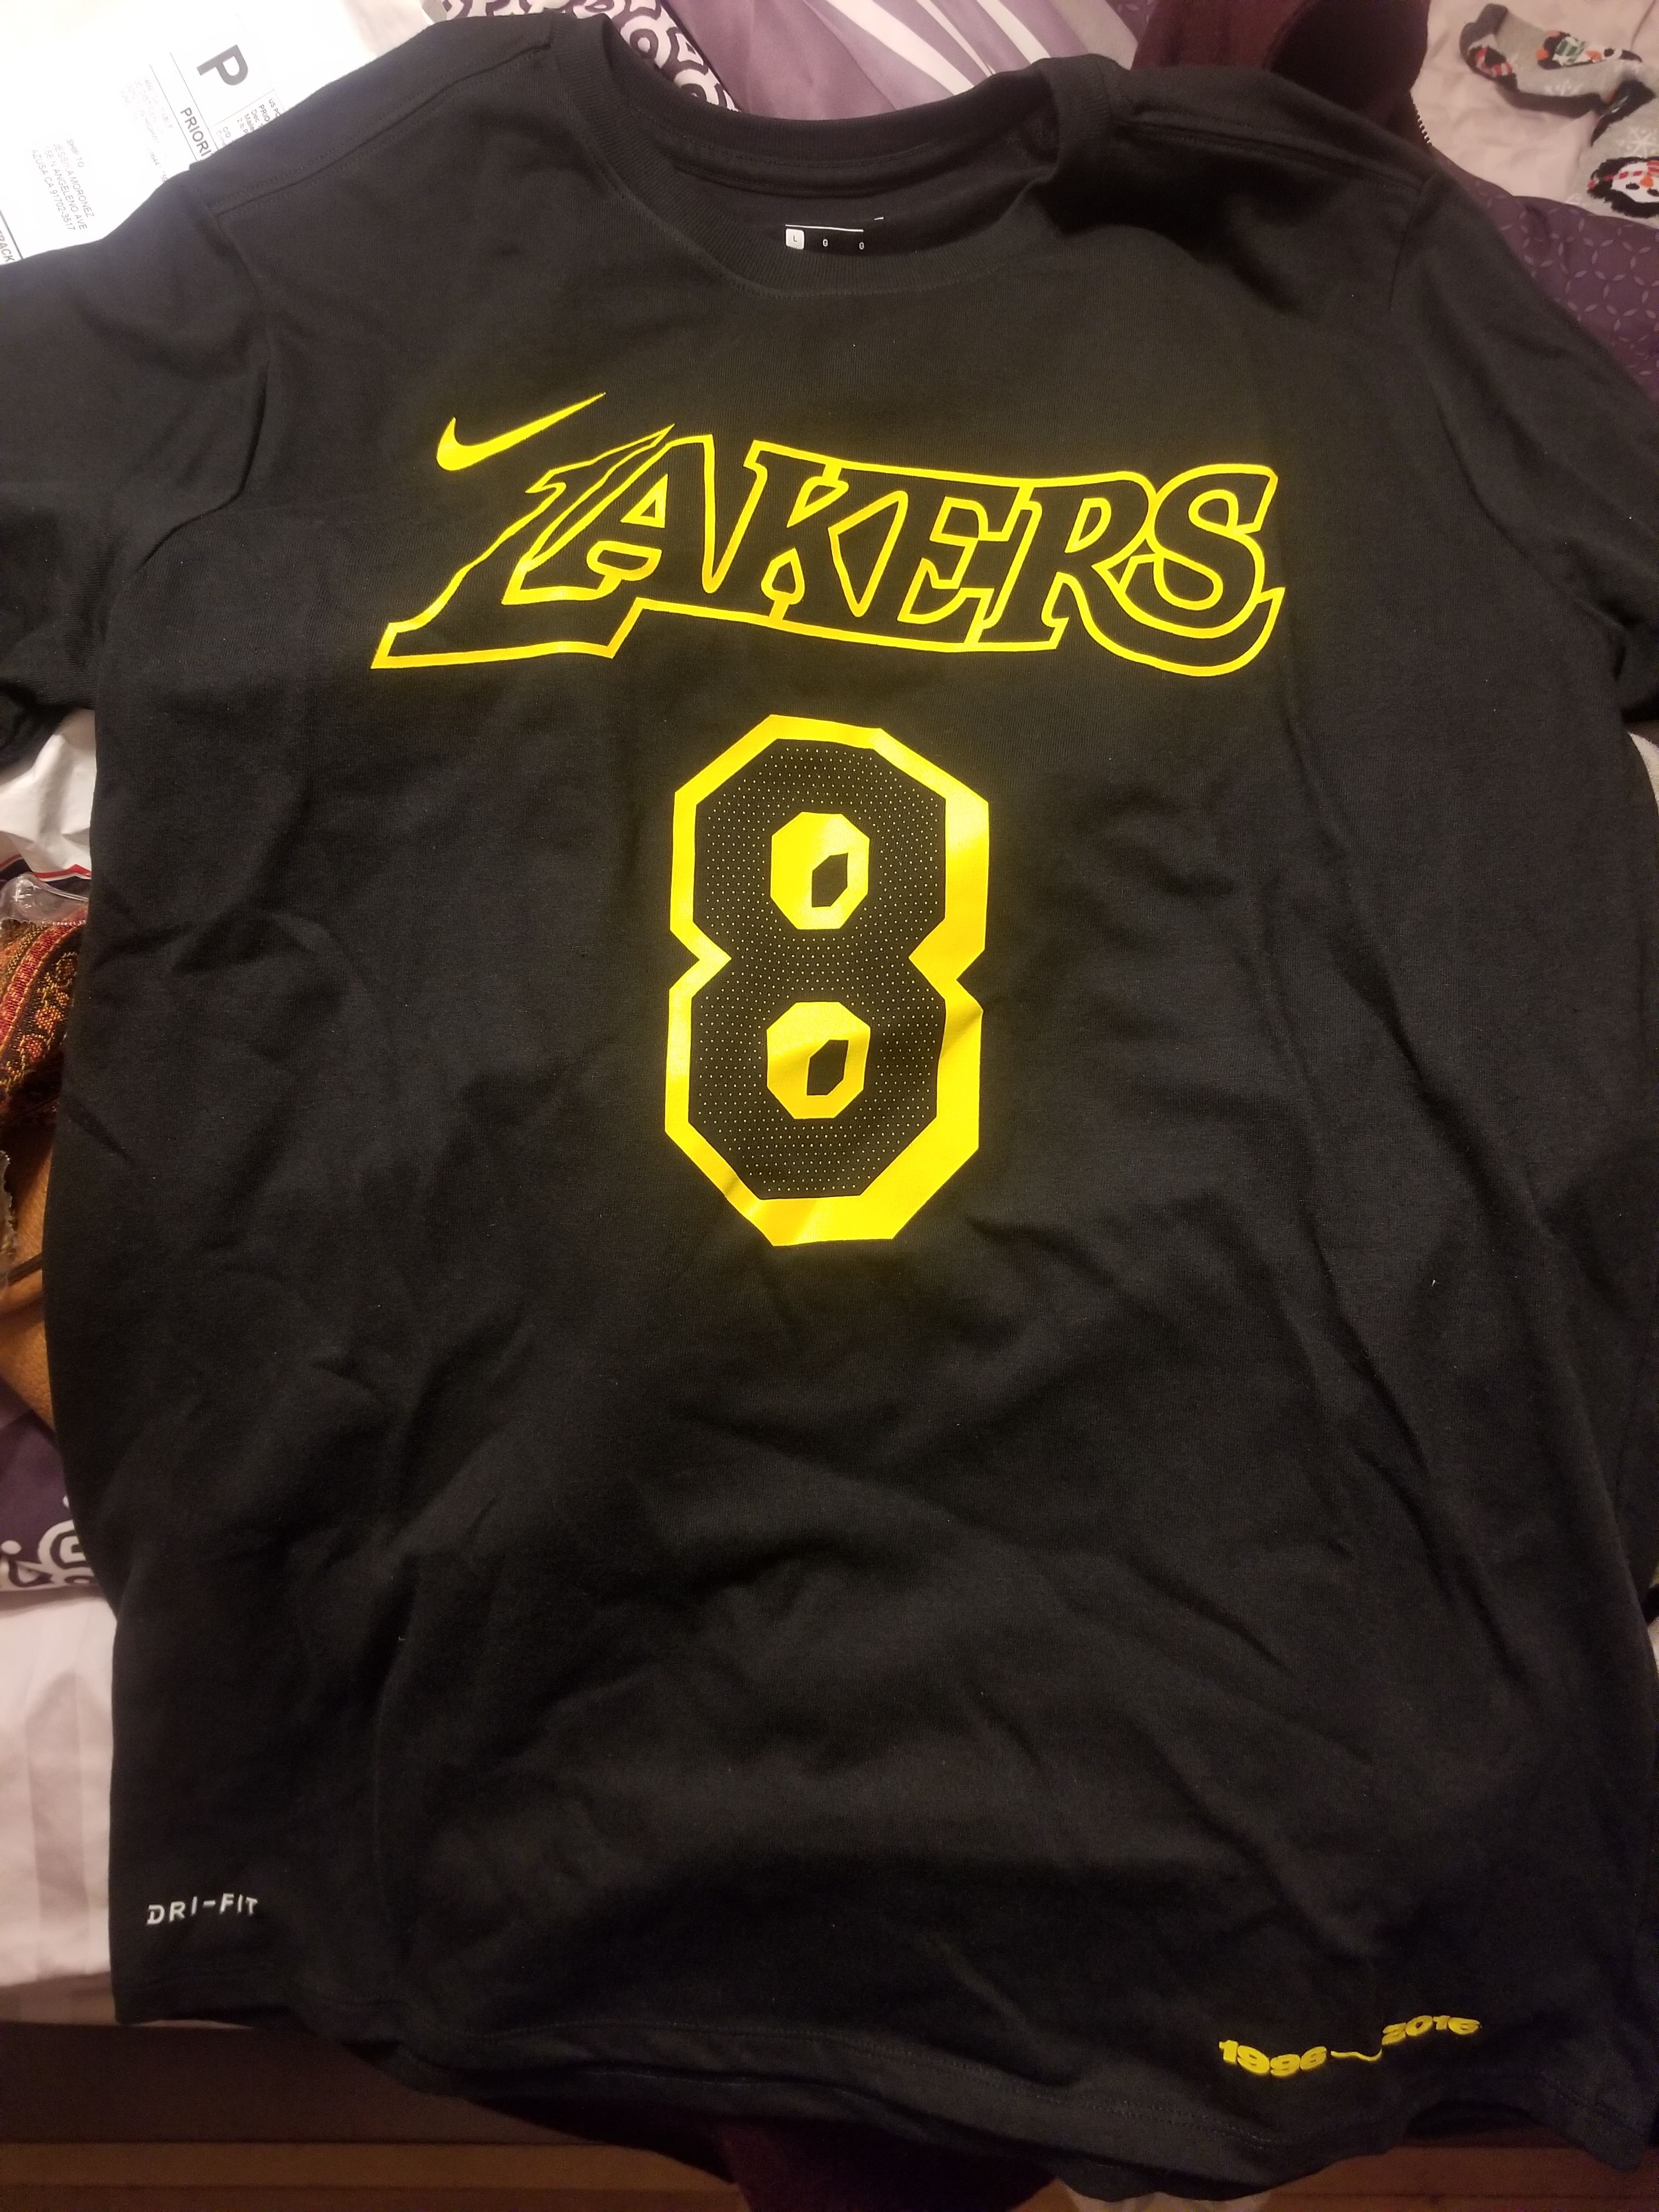 Kobe Bryant Jersey #8 for Sale in Los Angeles, CA - OfferUp